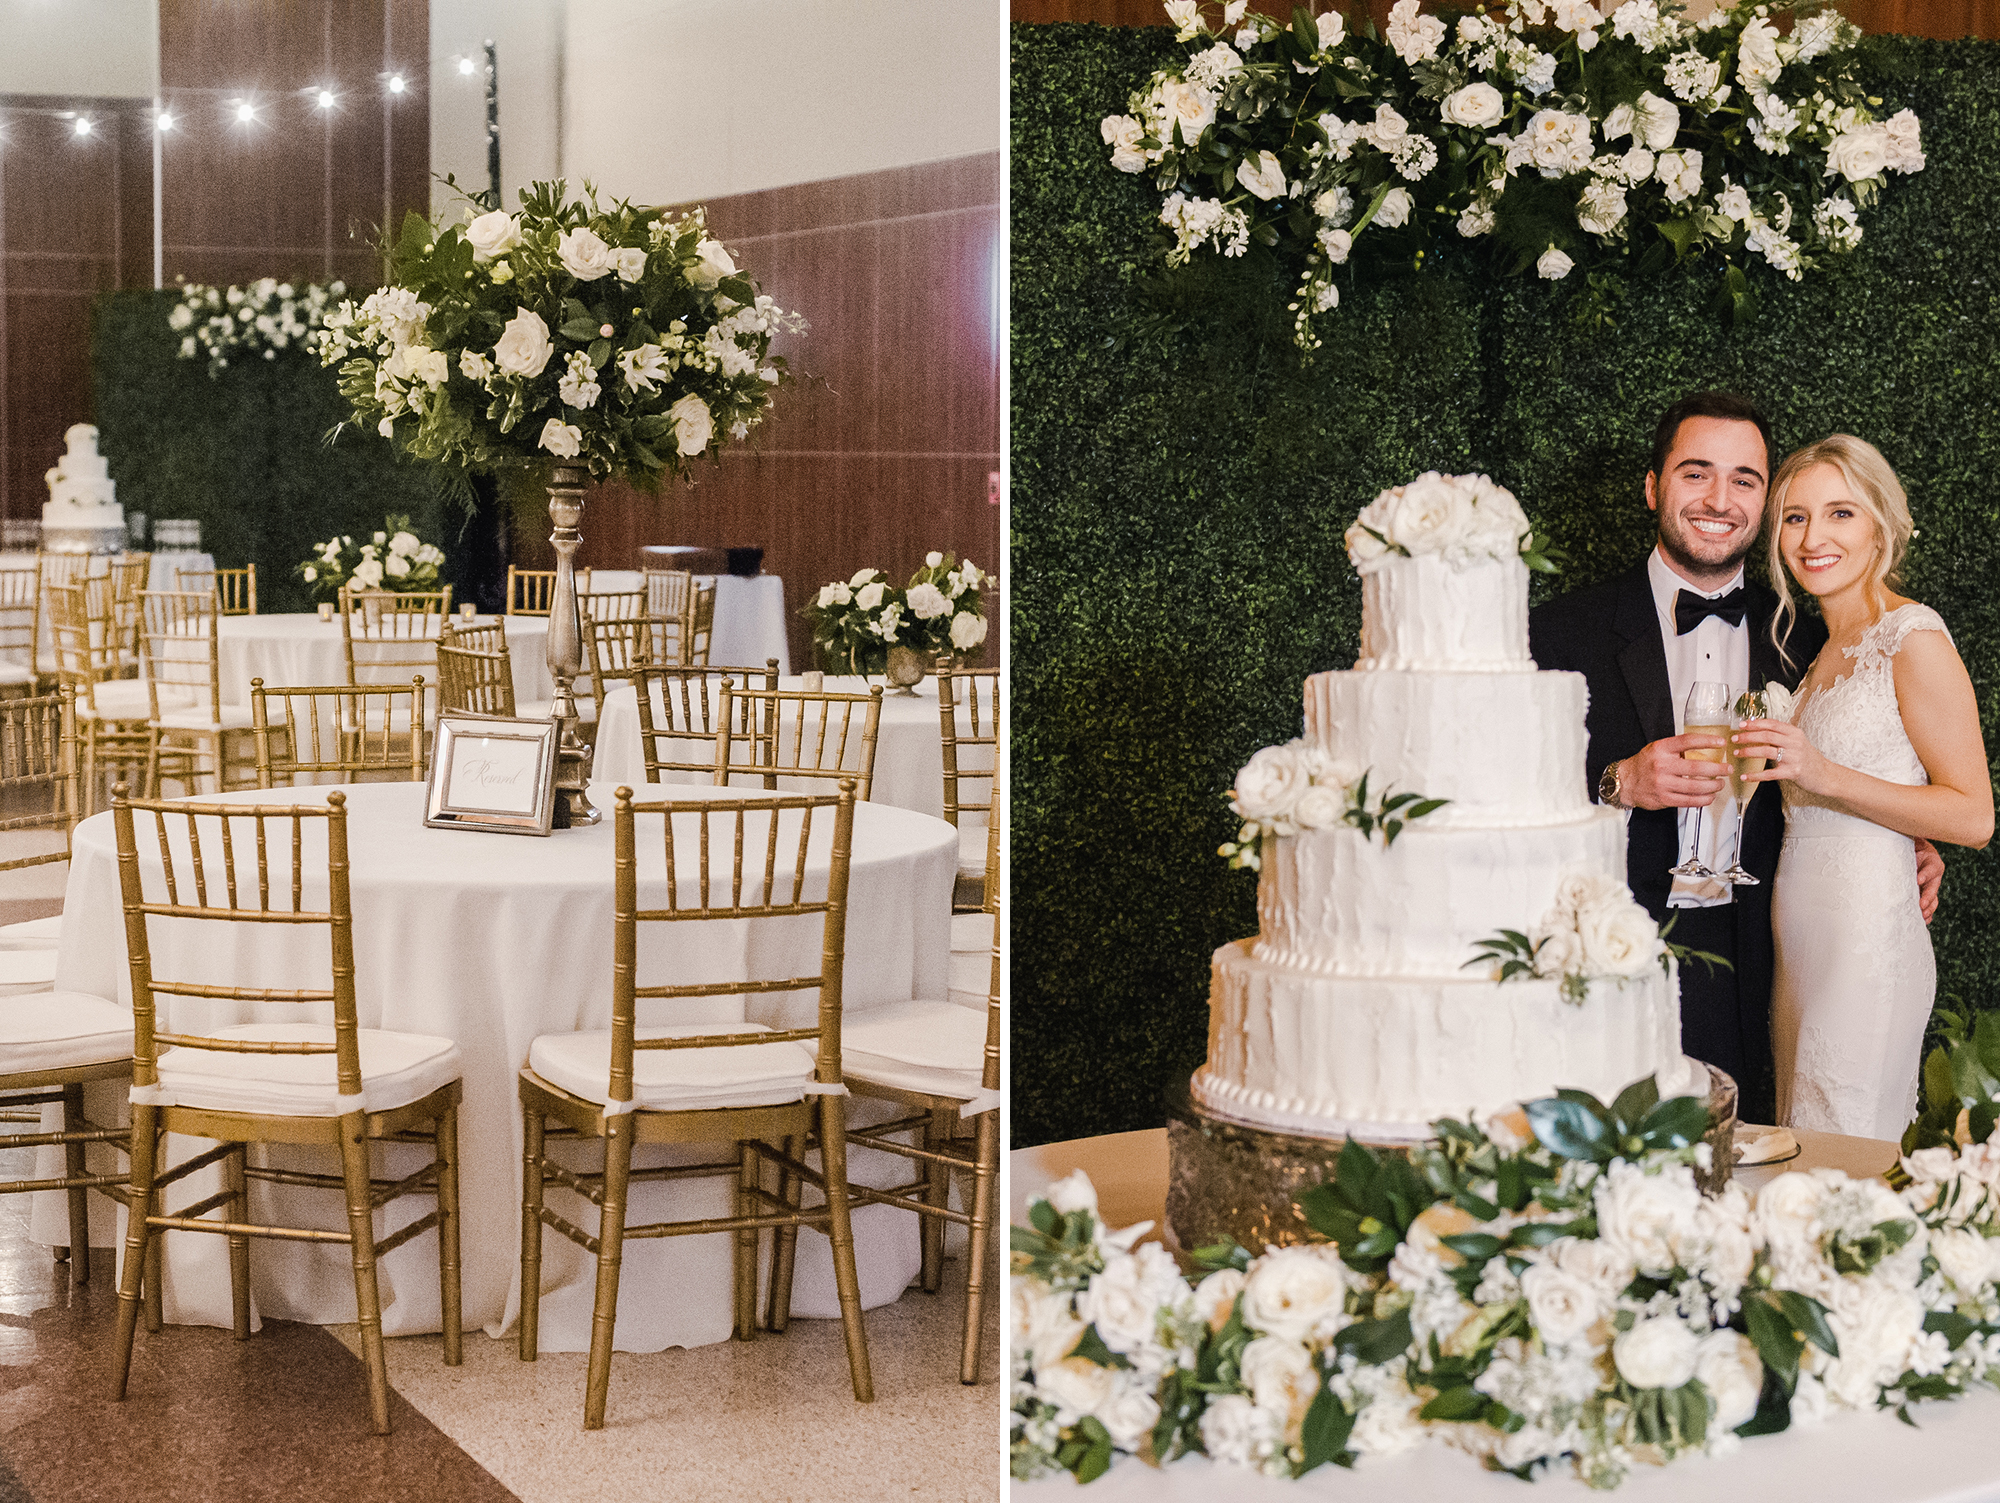 wedding reception table and floral details; bride and groom cutting wedding cake